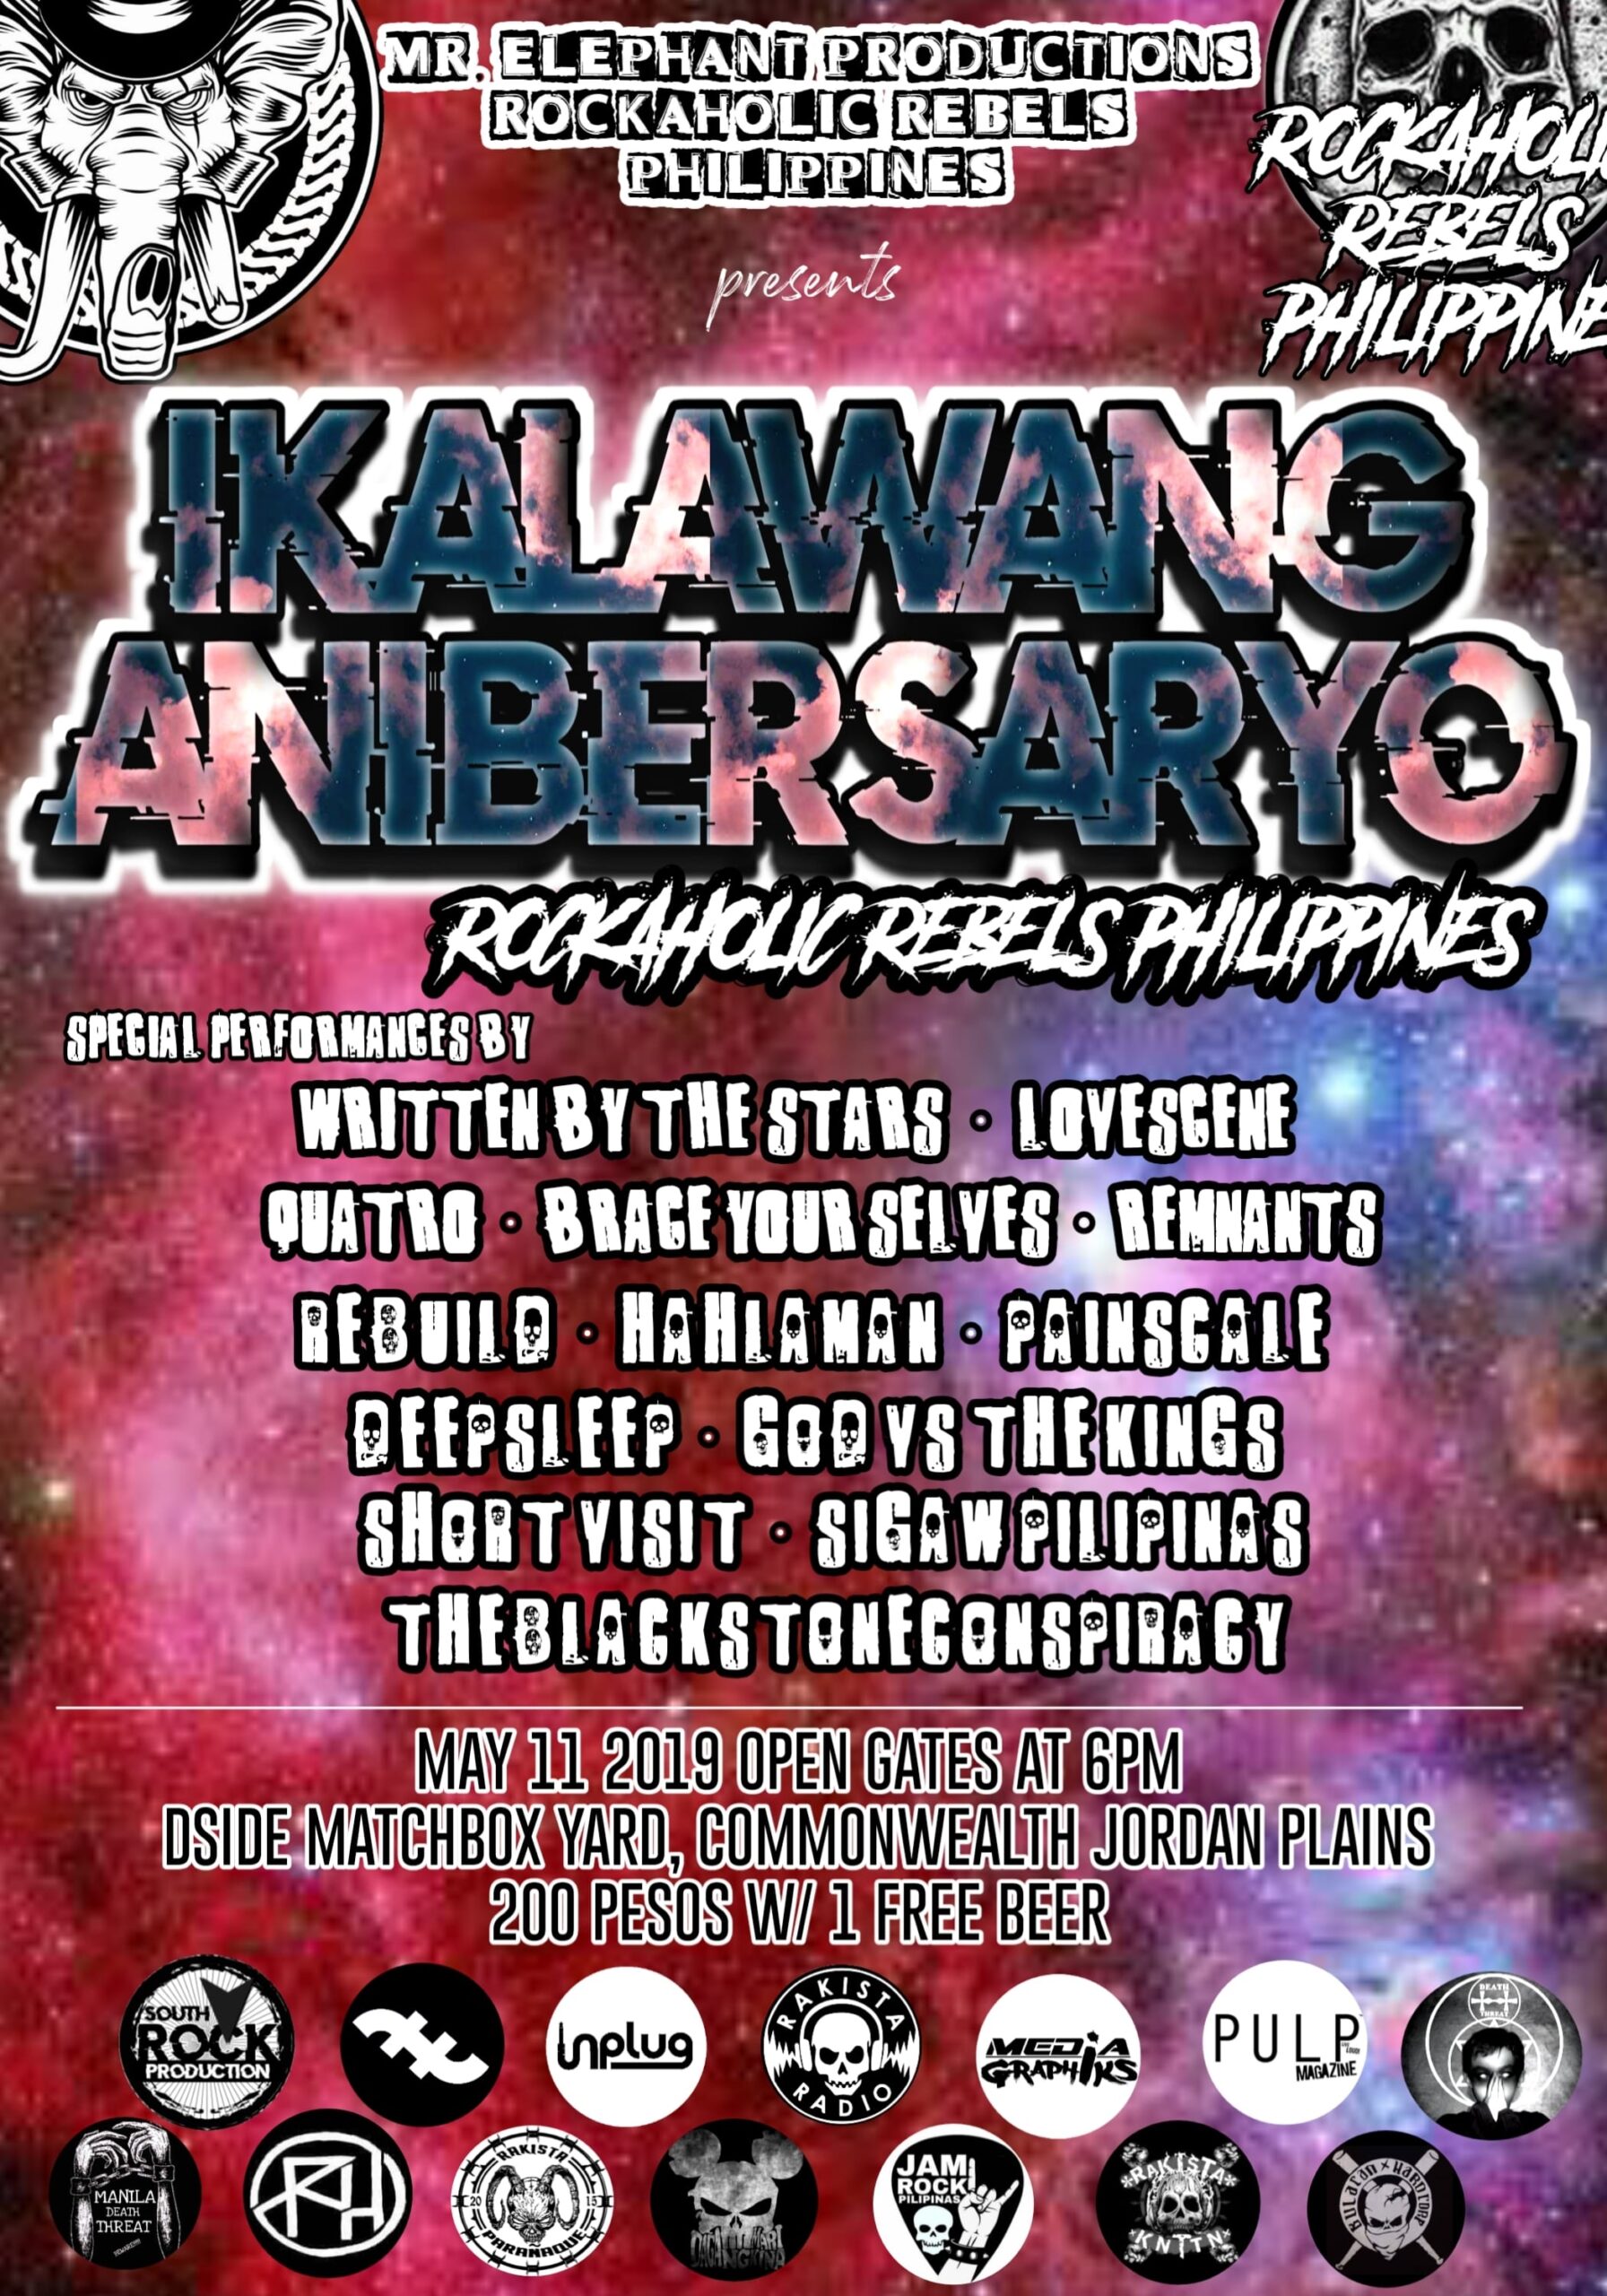 Rockaholic Rebels Philippines to Celebrate Two Years